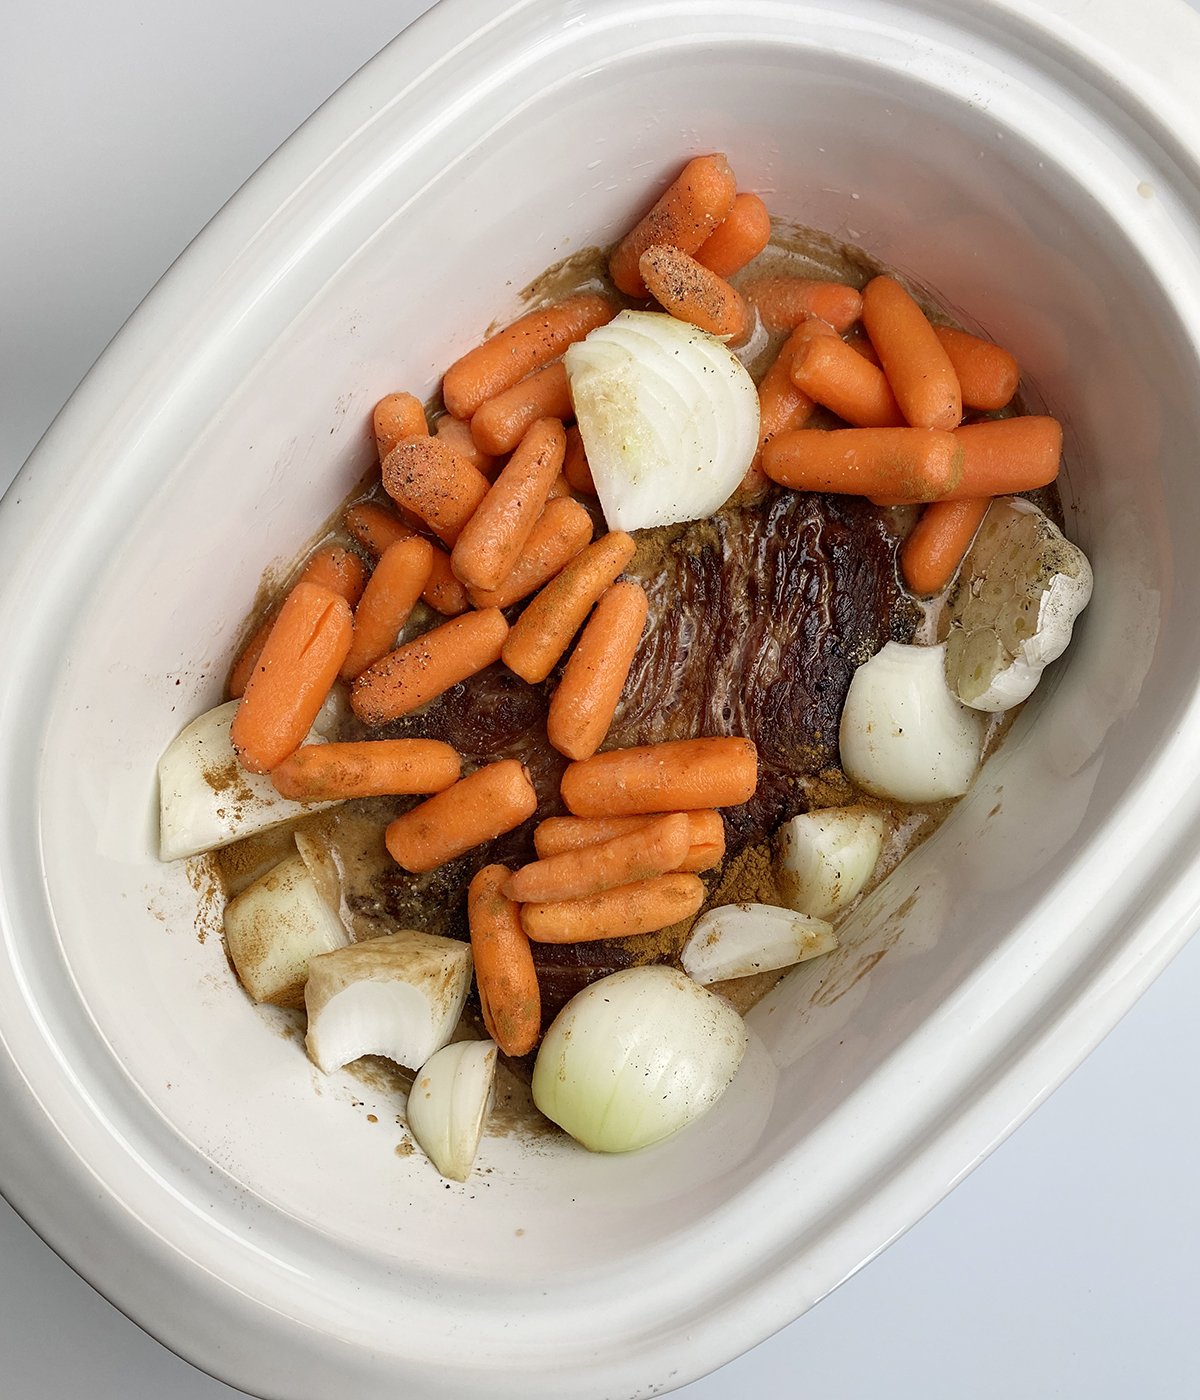 Coca cola pot roast ingredients in a slow cooker ready to be cooked.